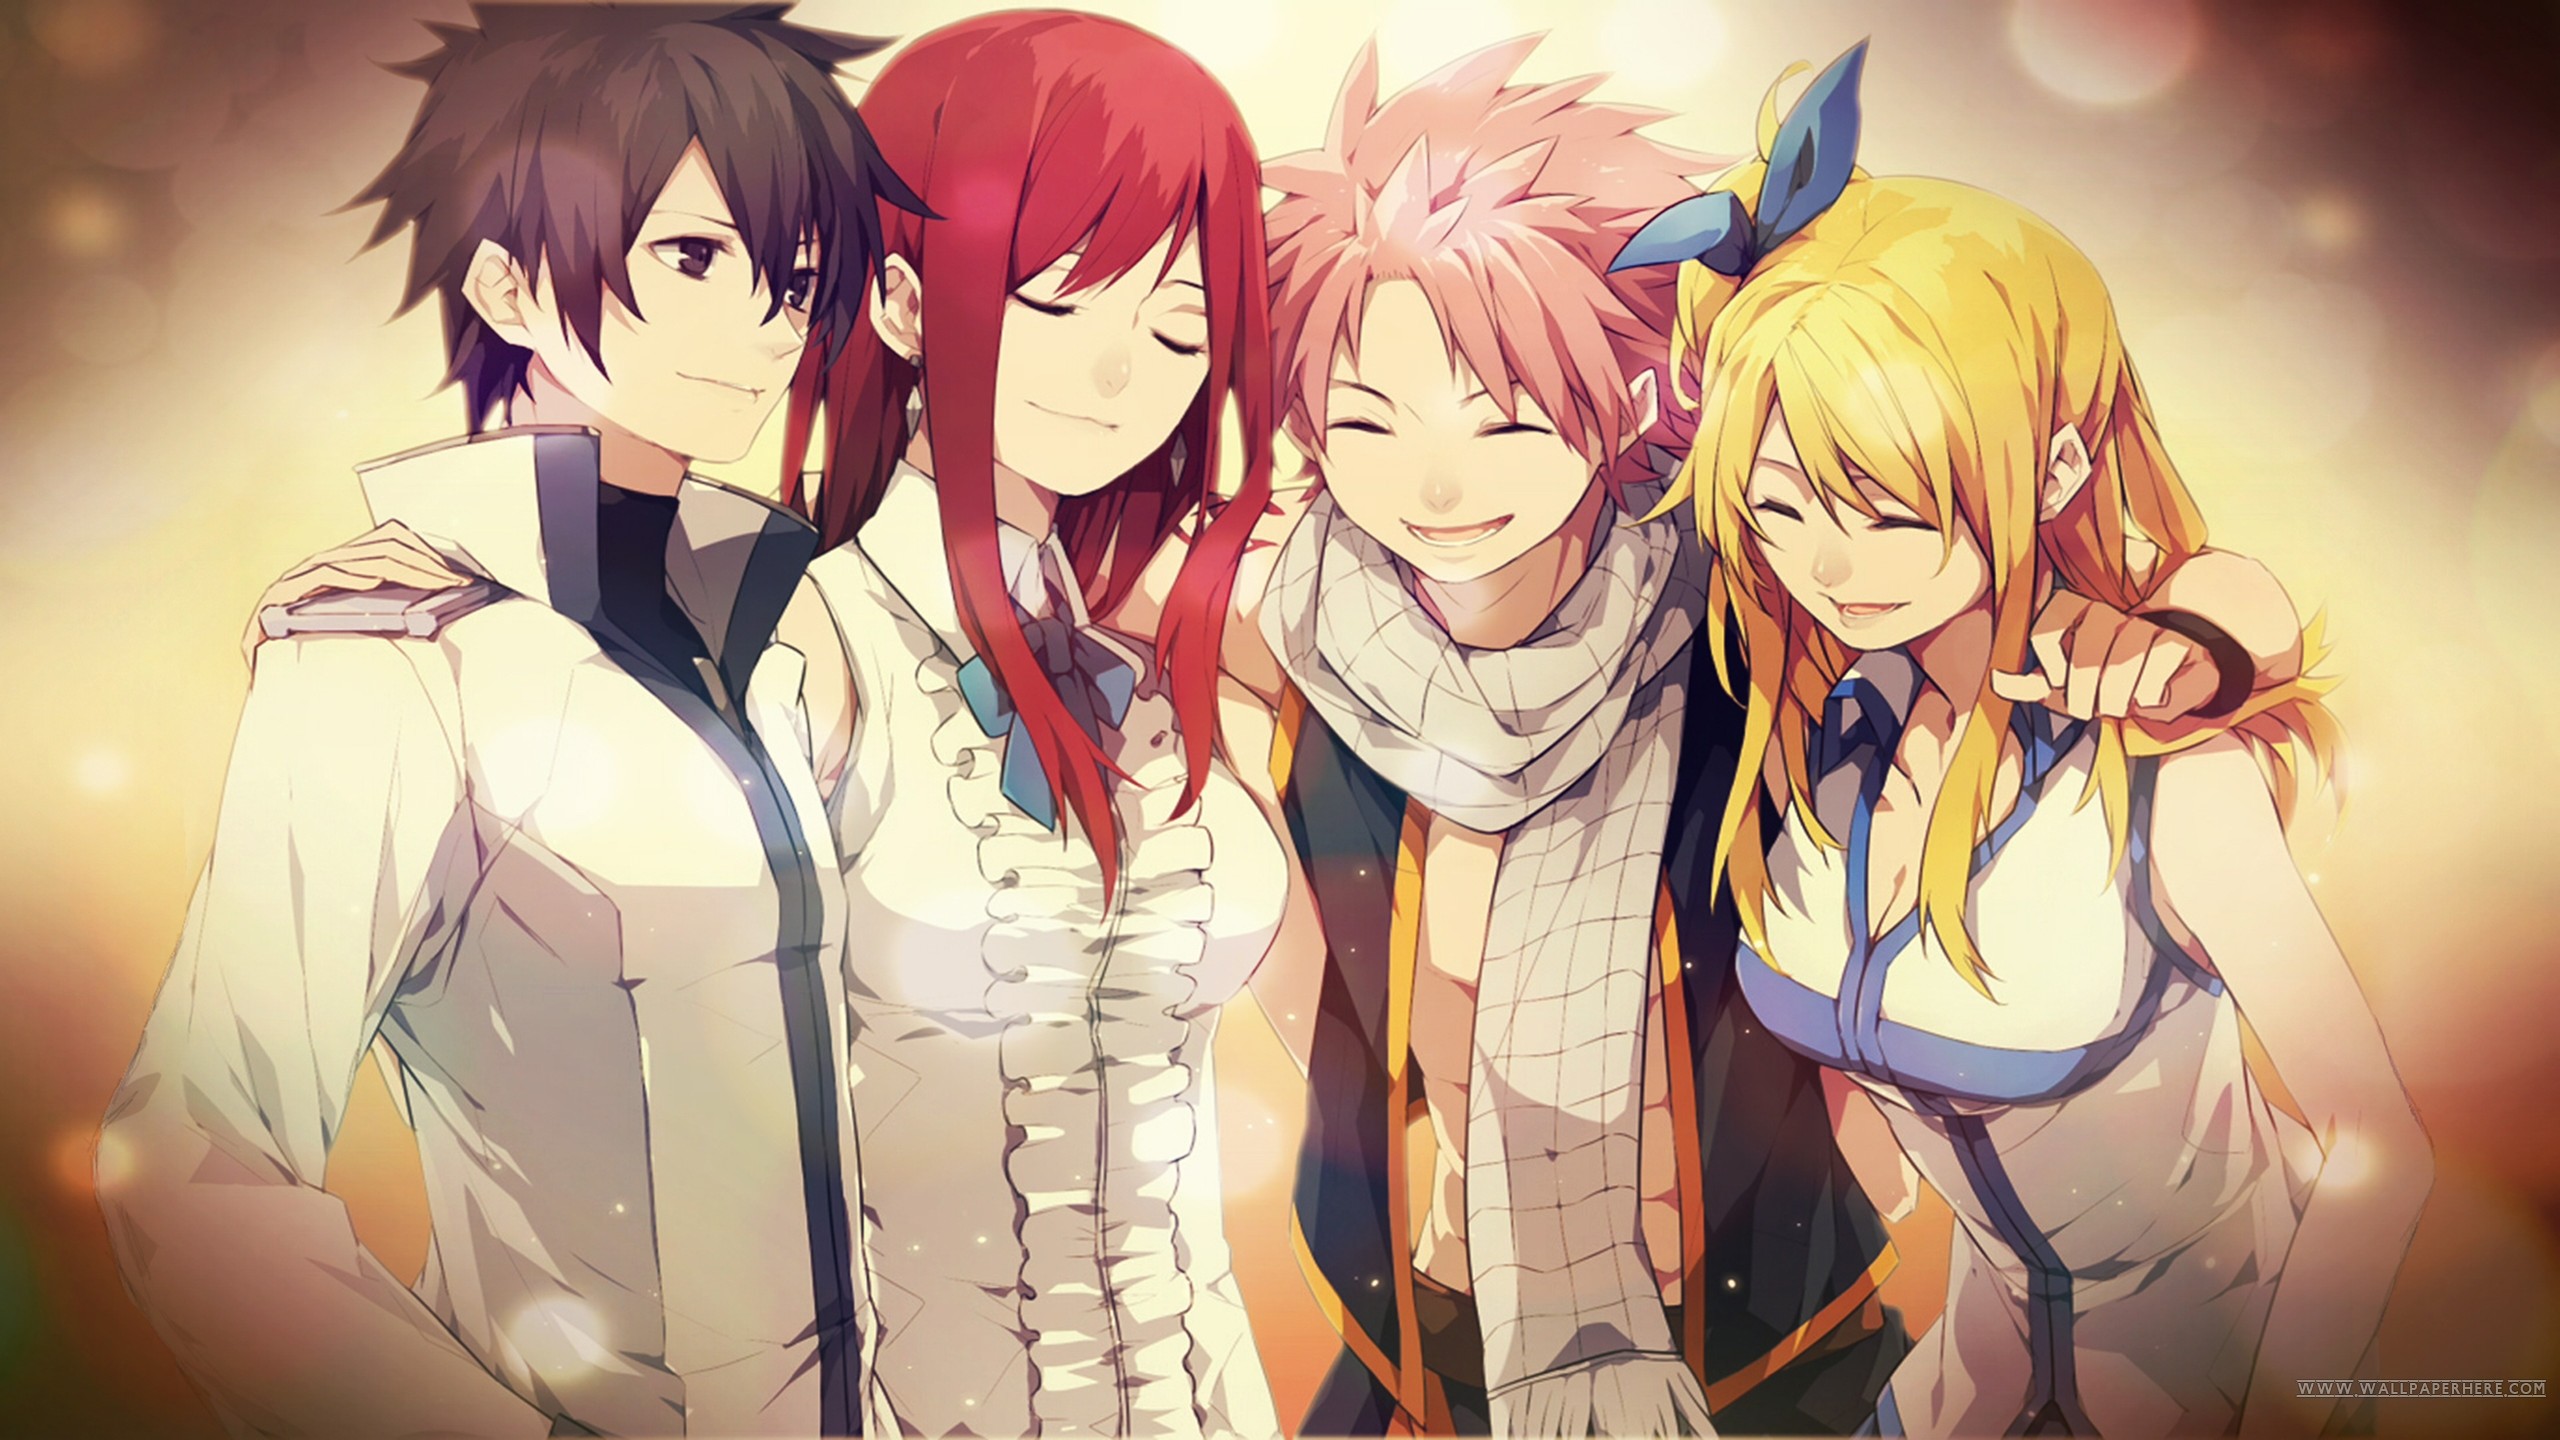 Fairy Tails Strongest Team Natsu Dragneel, Gray Fullbuster, Erza Scarlet and Lucy Heatfillia